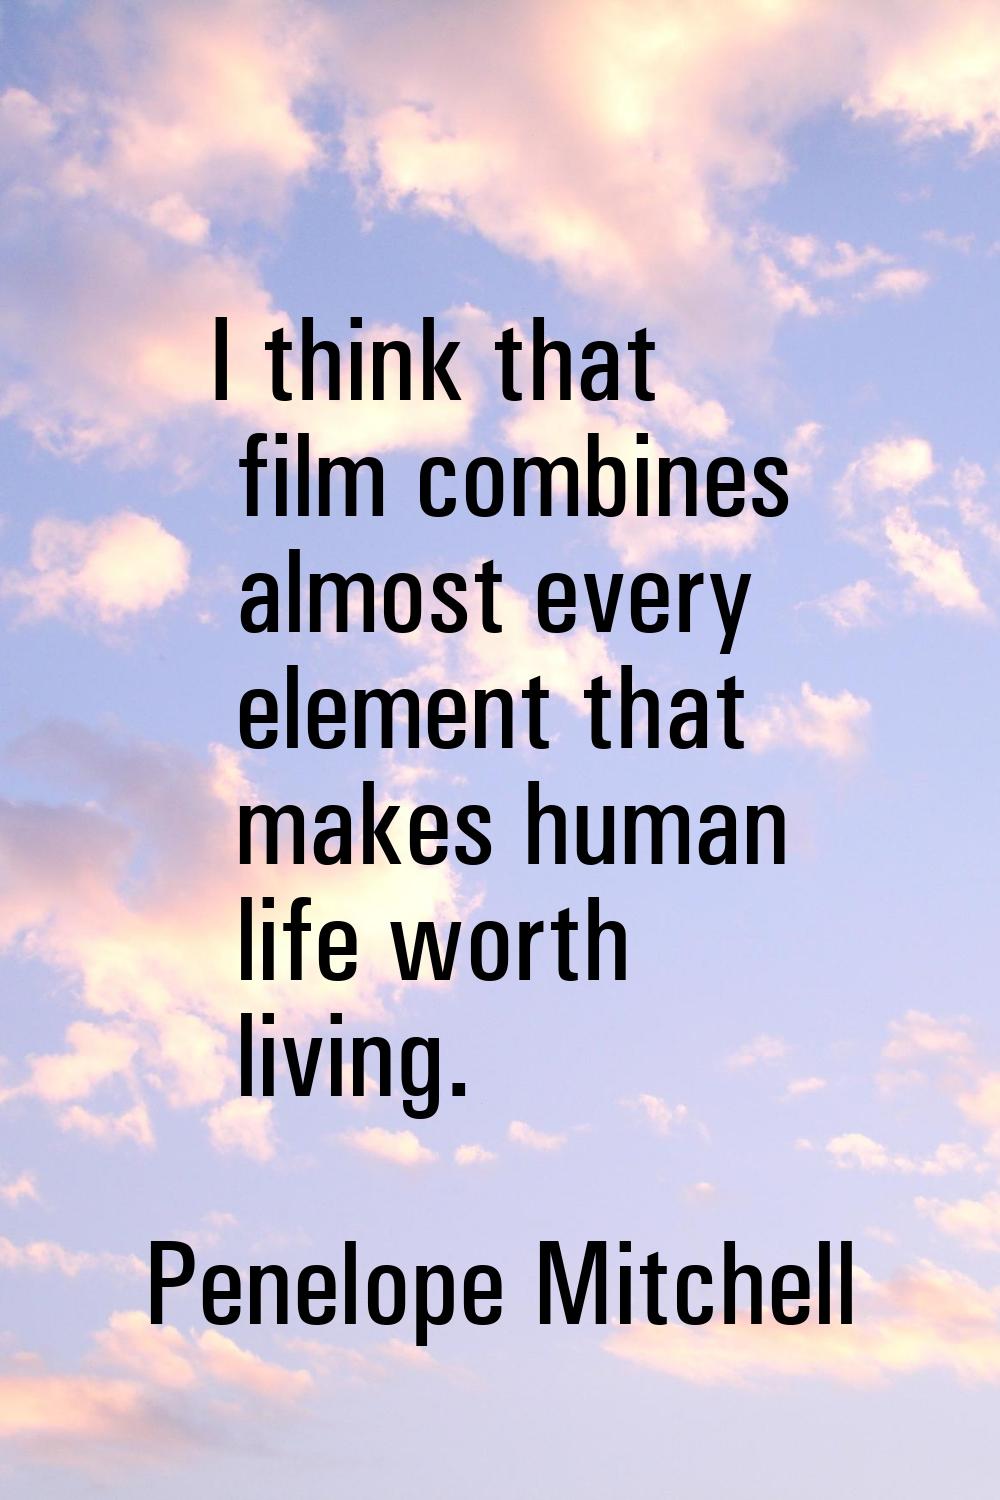 I think that film combines almost every element that makes human life worth living.